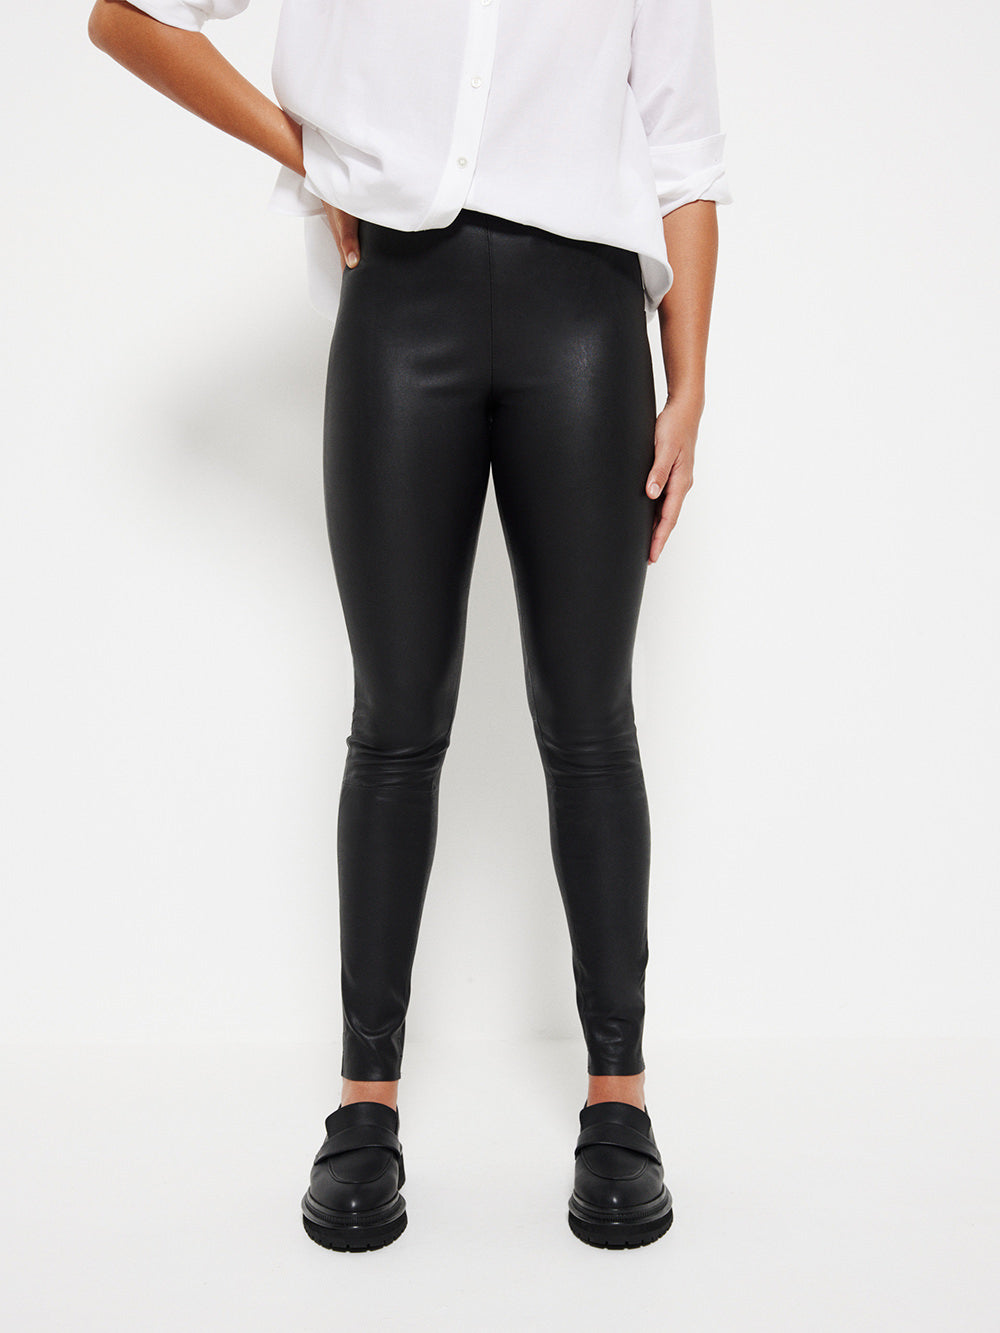 The Stretch Leather Pant